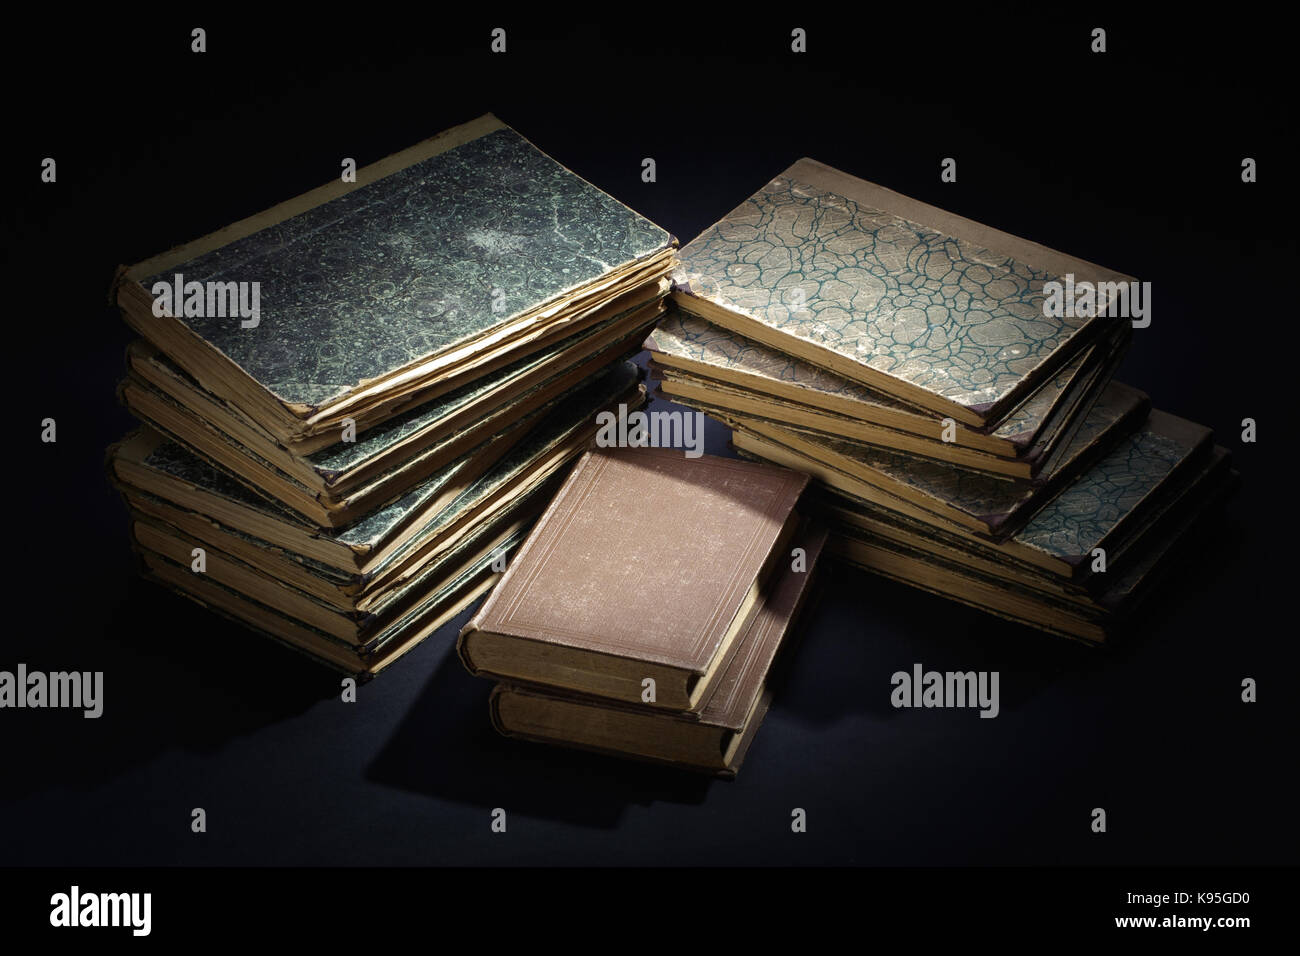 old books, papers, ink pen and inkpot on black background Stock Photo